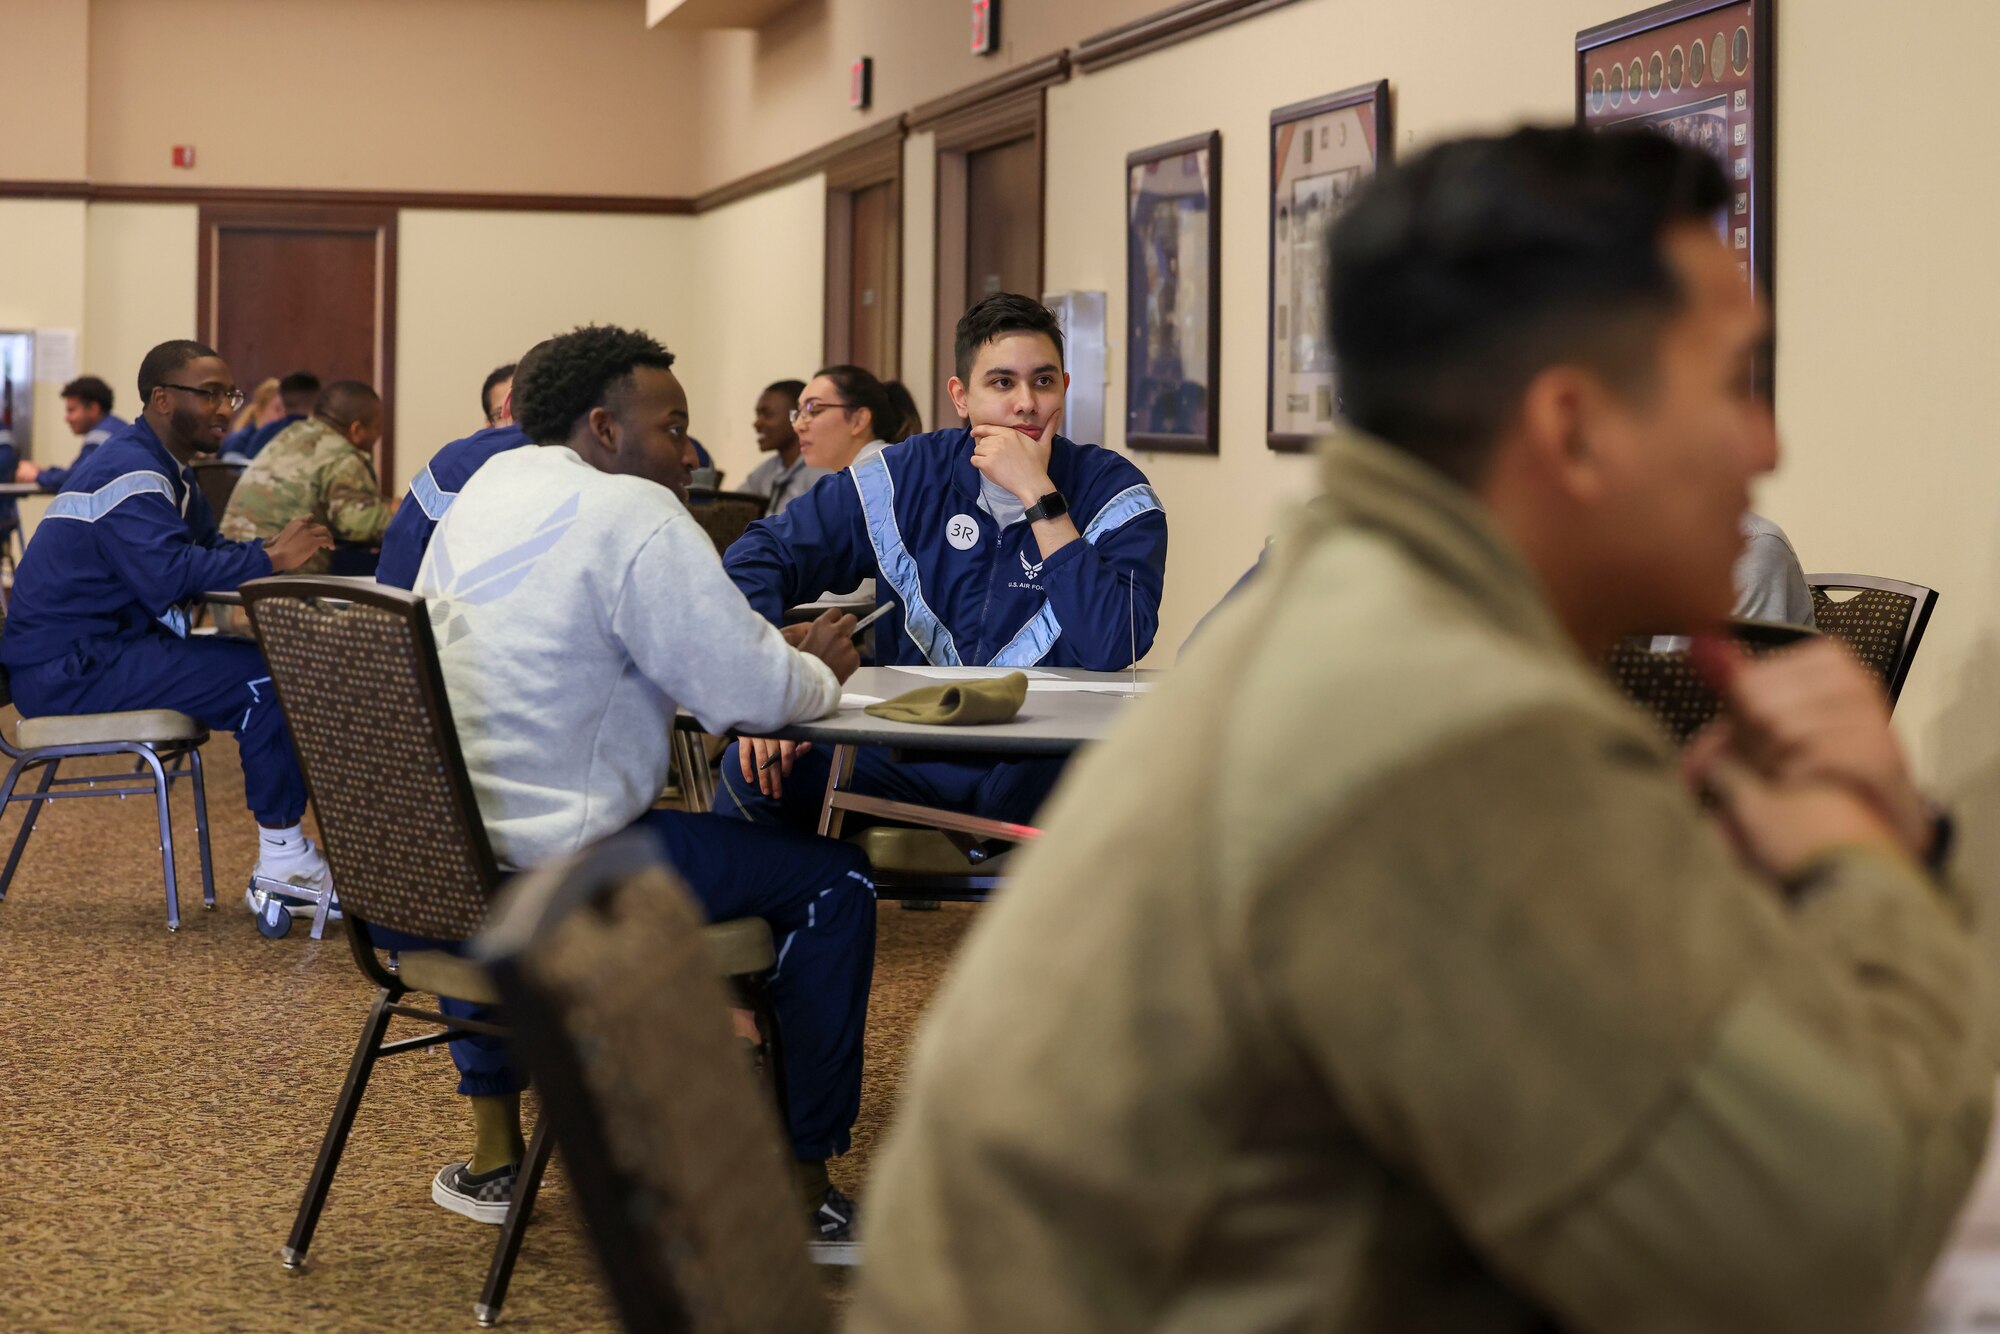 Beale Airmen interact with each other during the Beale Social on Feb. 27, 2023, at Beale Air Force Base, Calif.